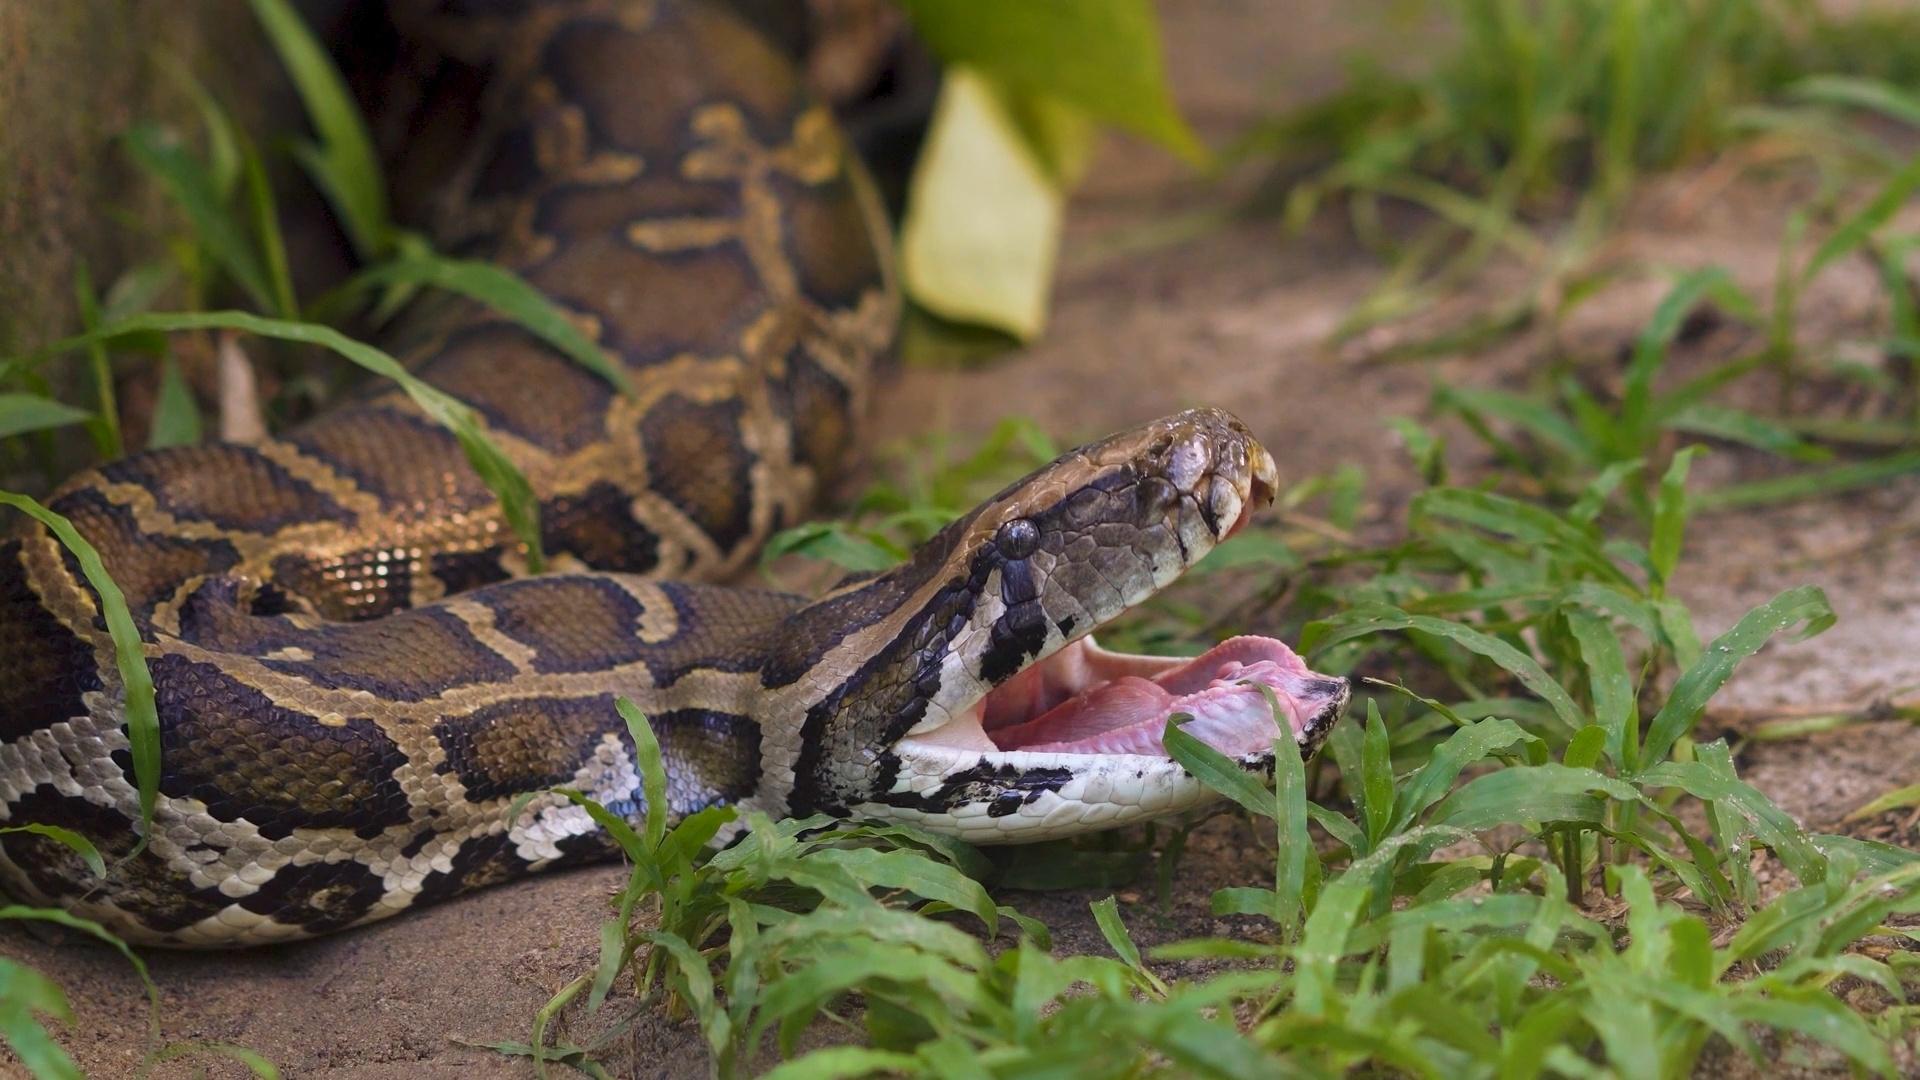 A Burmese python with its mouth open.